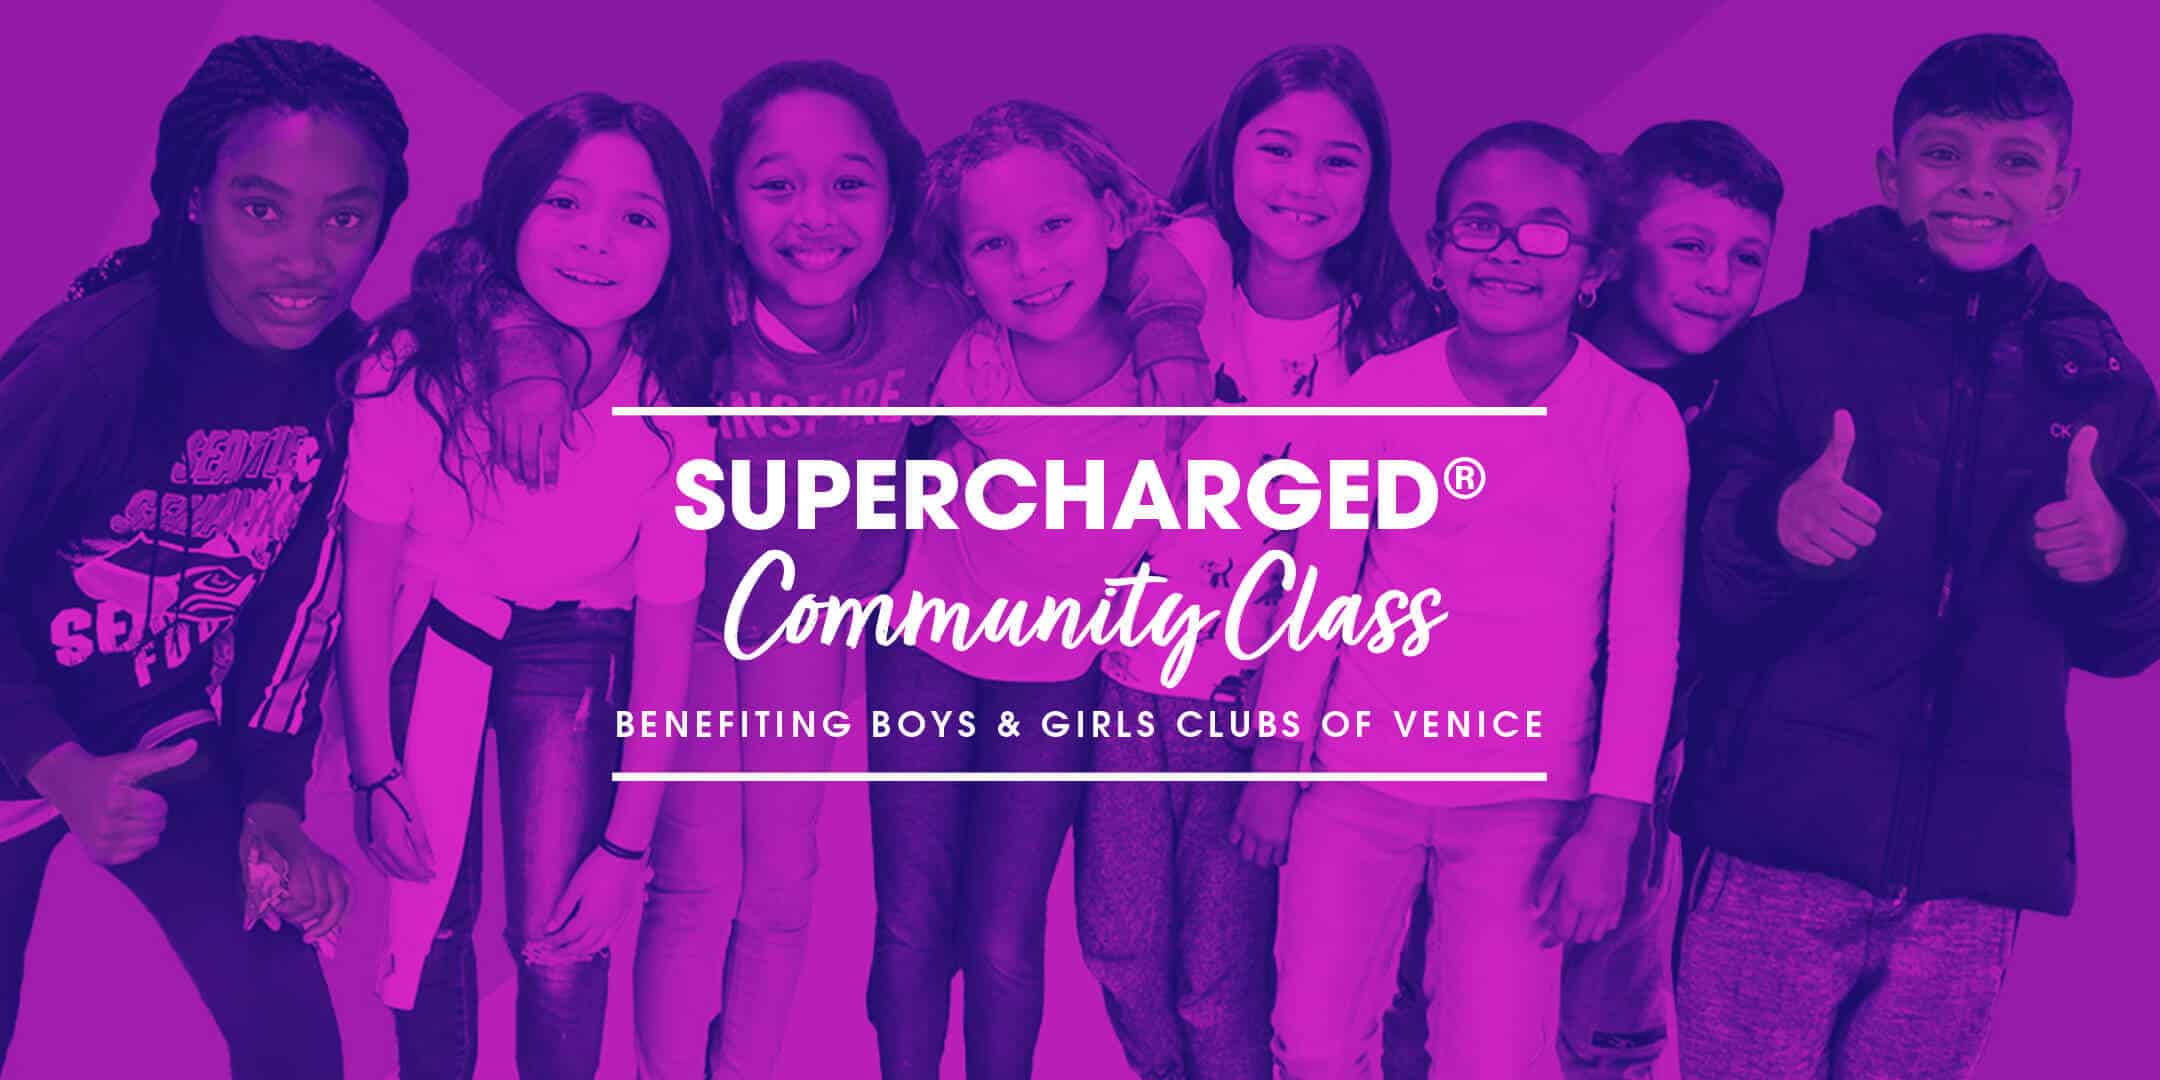 SUPERCHARGED Community Class